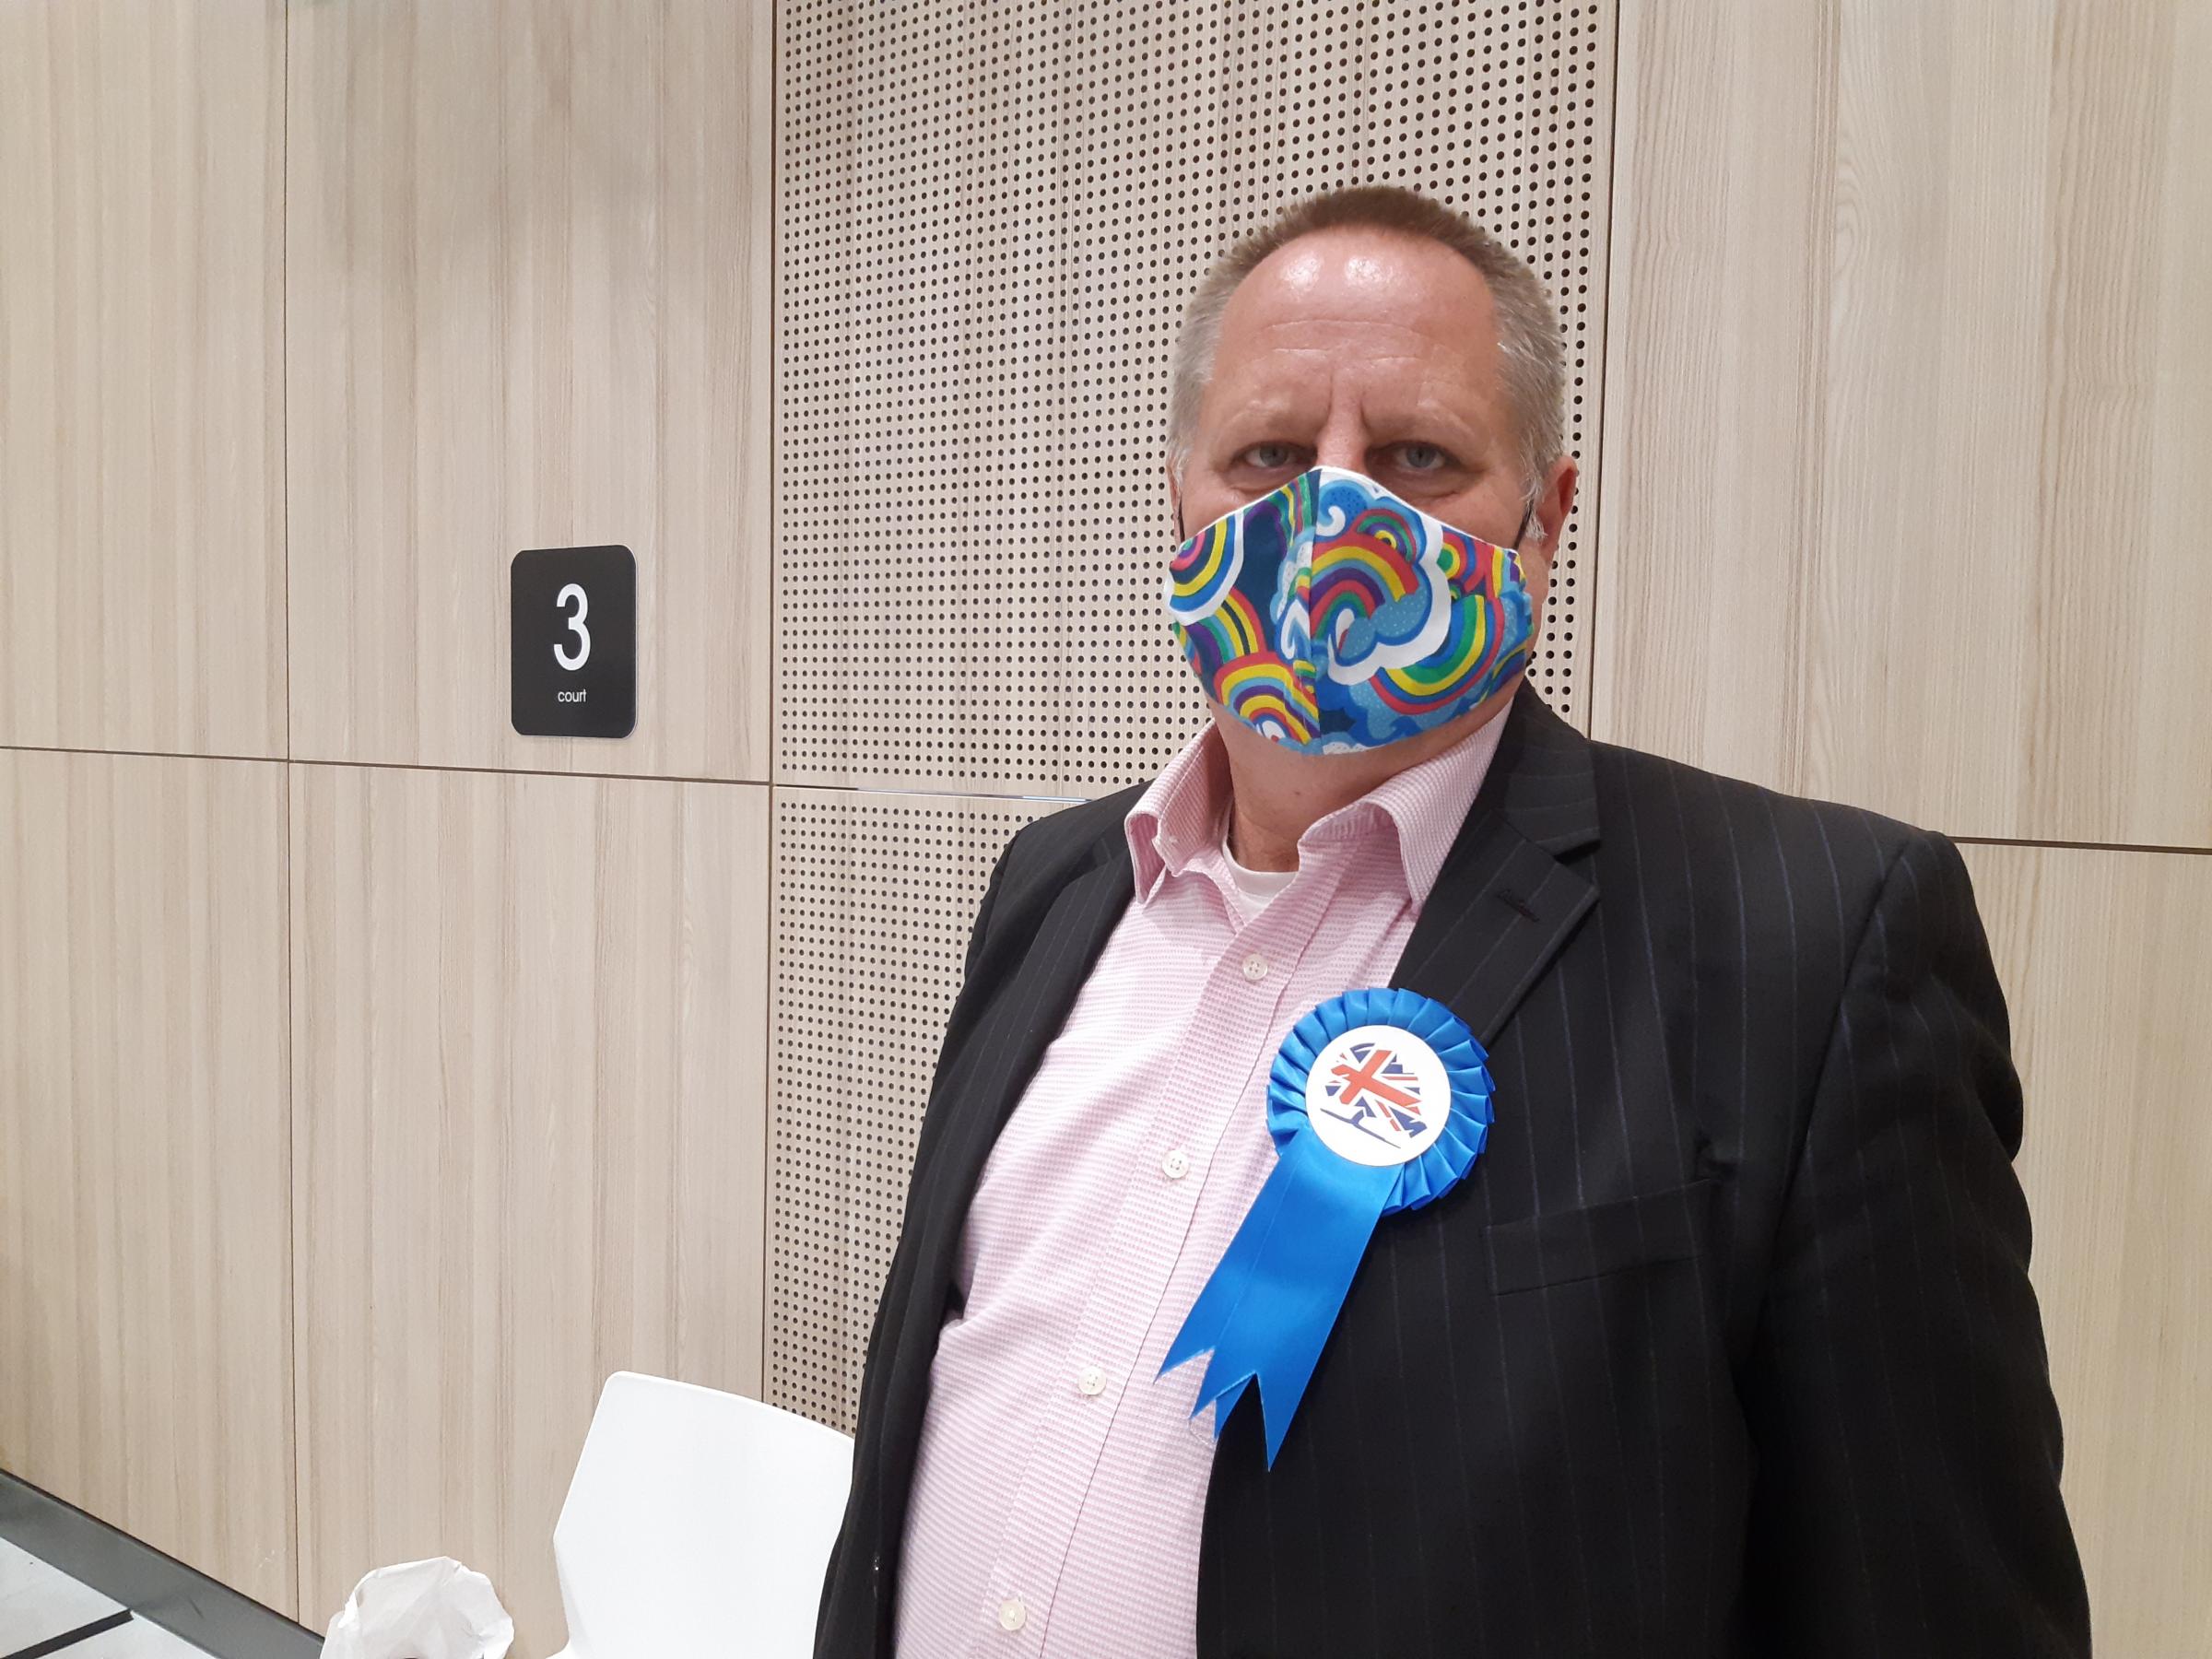 Cllr Wayne Strutton at the local election on May 6